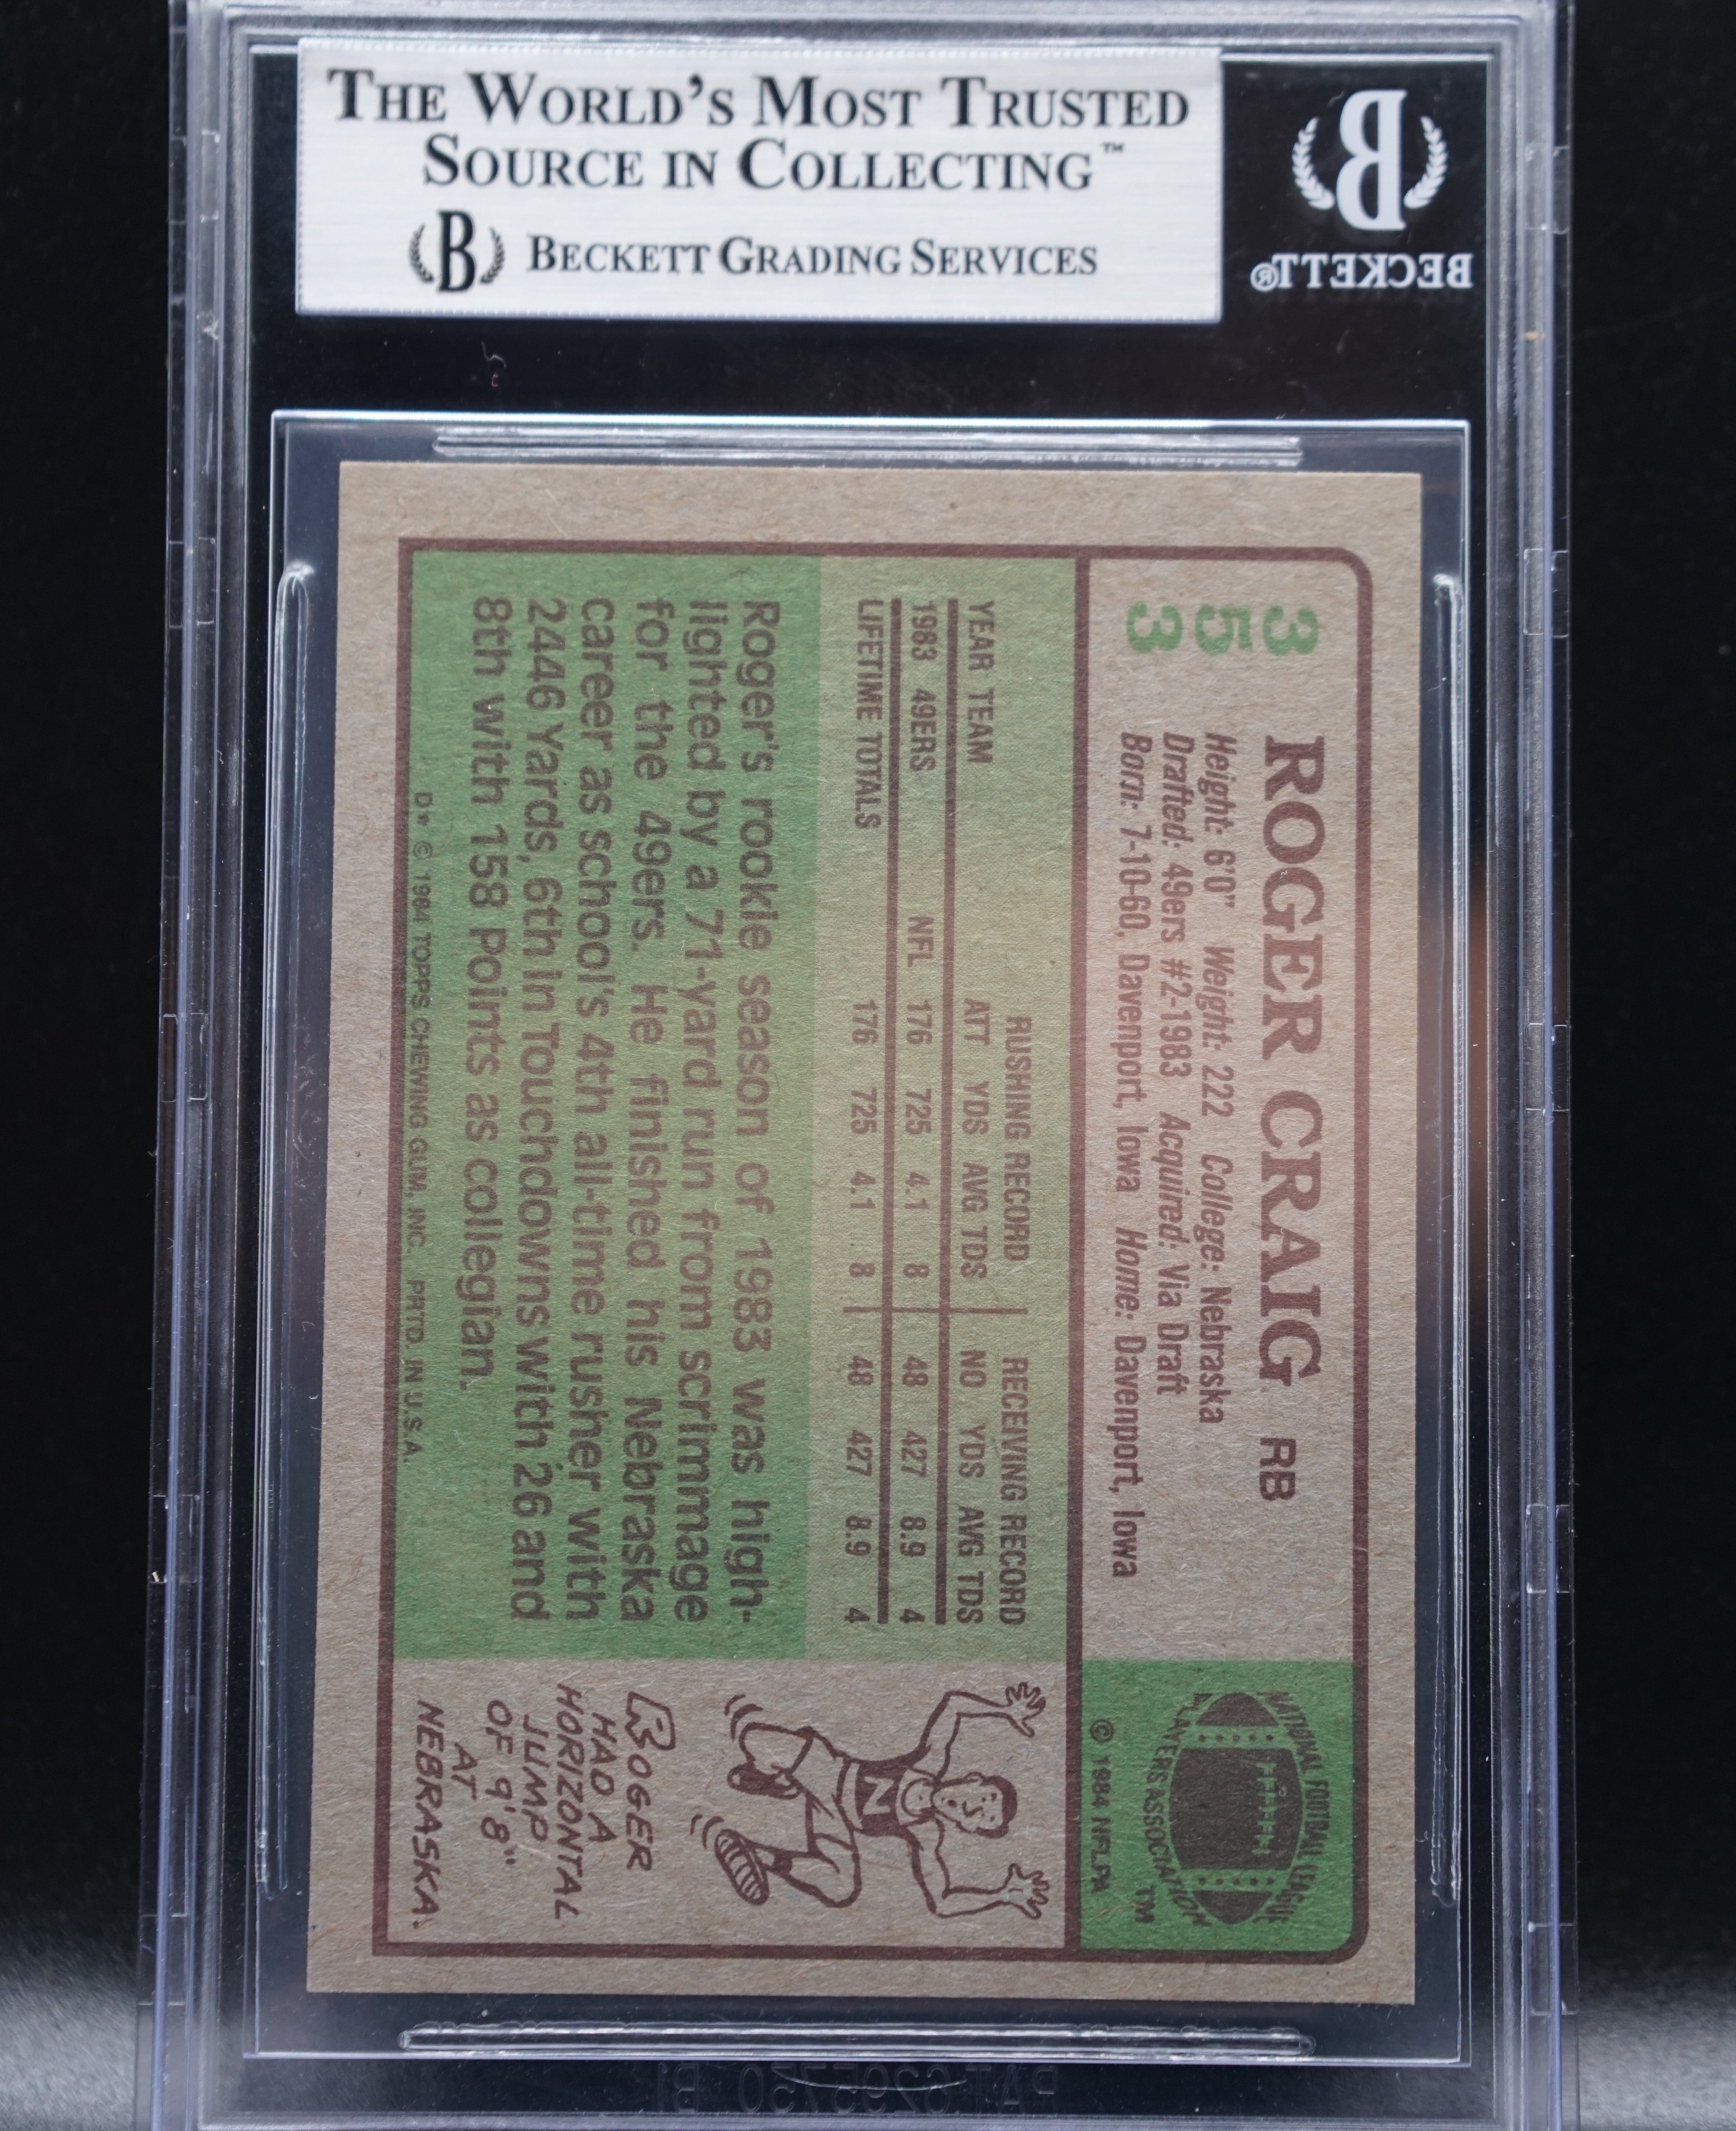 Roger Craig Rookie Card - San Francisco 49ers - Tops Trading Card - Signed in Black Sharpie with "1000/1000 85" Inscription - Slabbed with Beckett COA